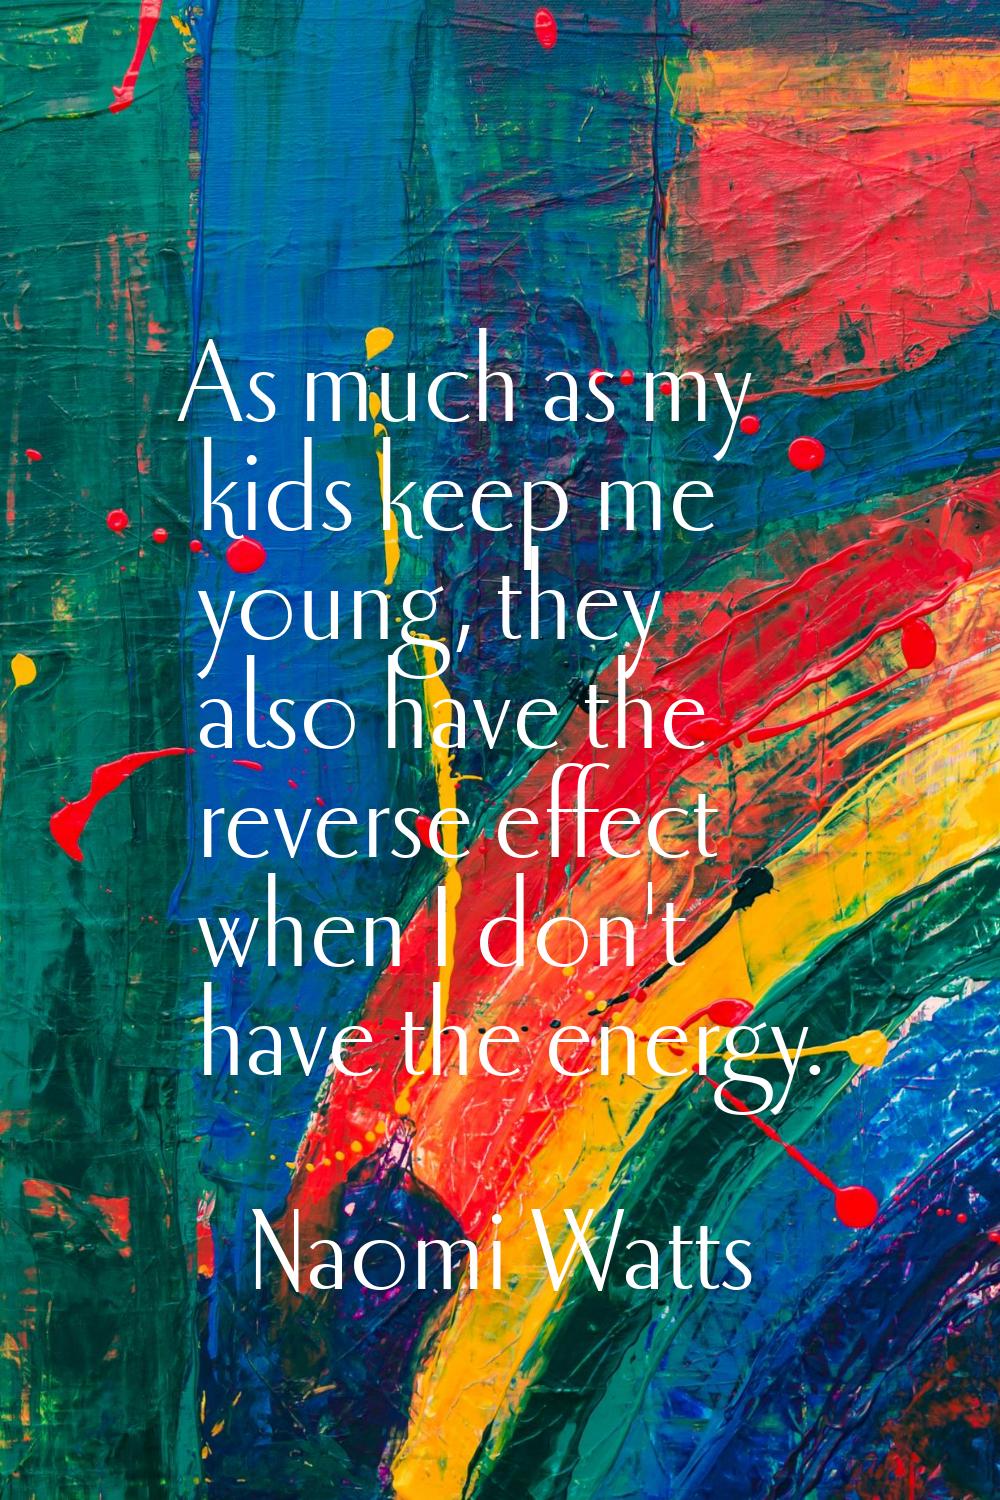 As much as my kids keep me young, they also have the reverse effect when I don't have the energy.